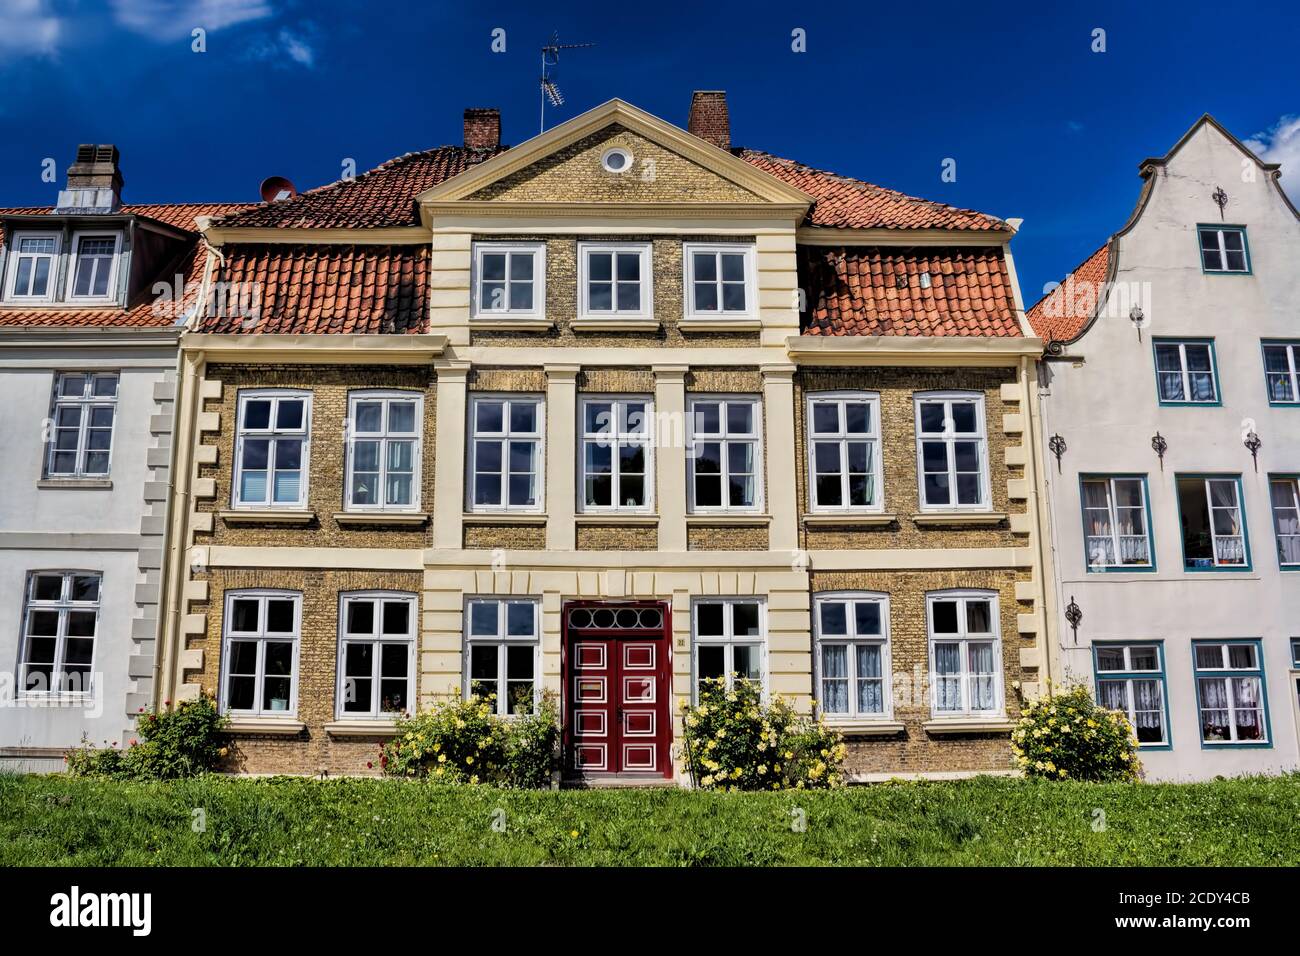 ancient row of houses in Glückstadt, Germany Stock Photo